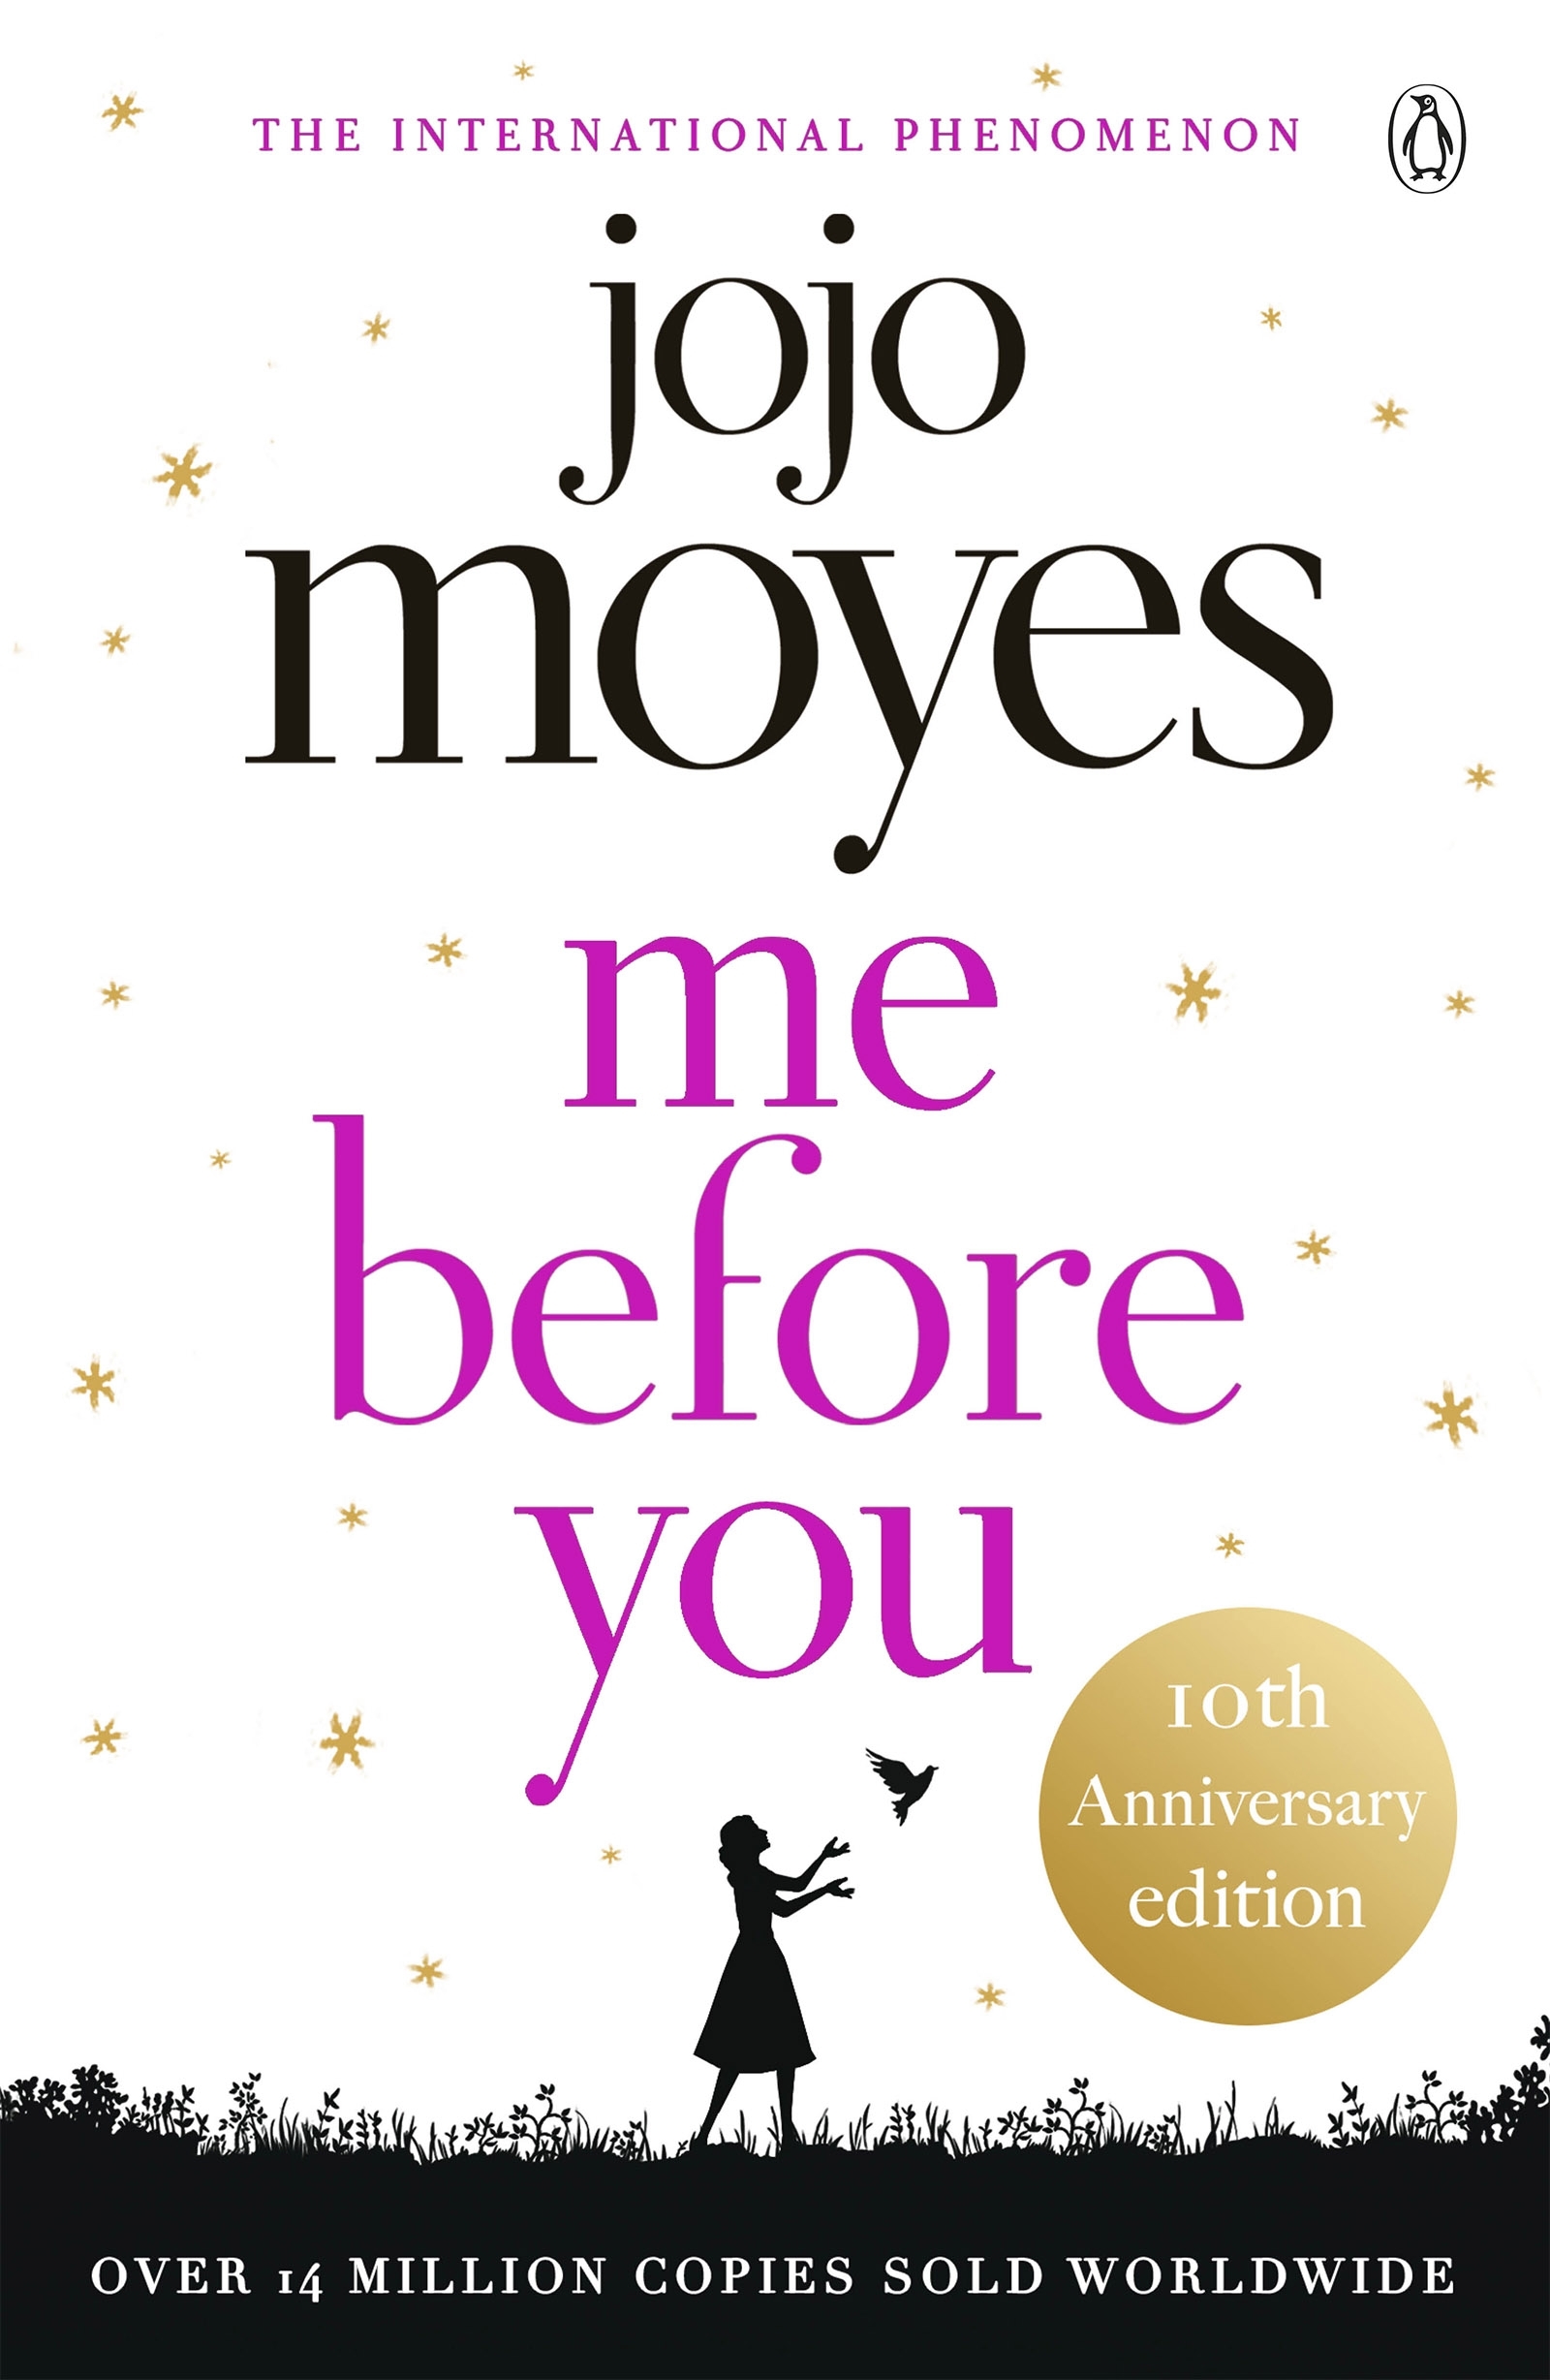 book reviews me before you